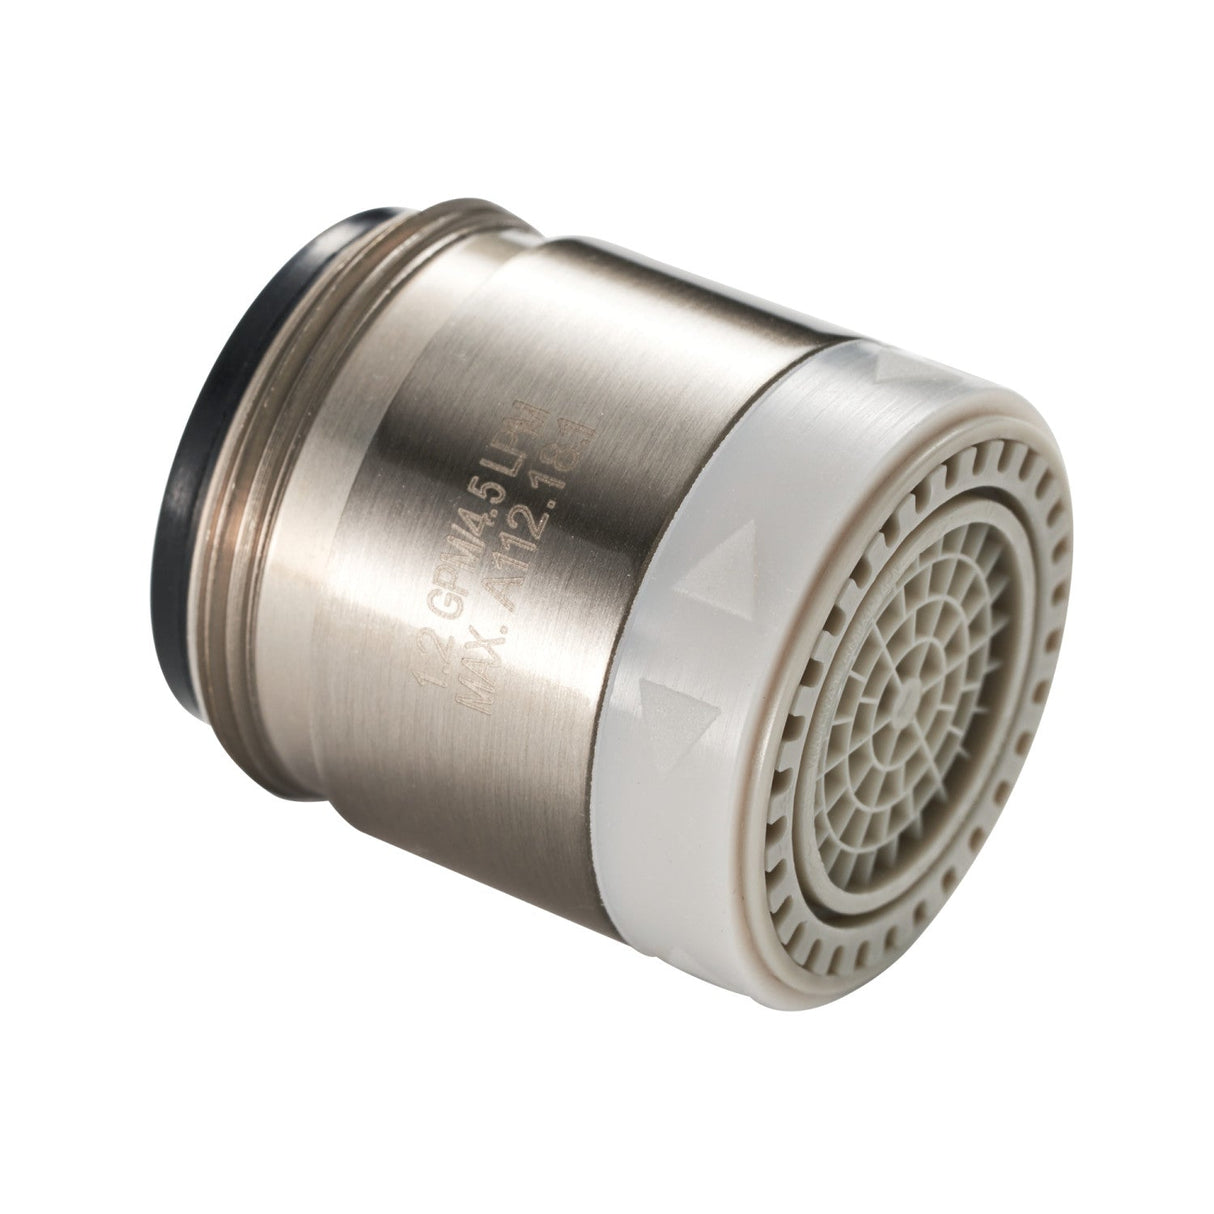 Spritz A151627UNSL8 Dual-function 1.2 GPM Male Aerator, 15/16"-27 UNS, Brushed Nickel